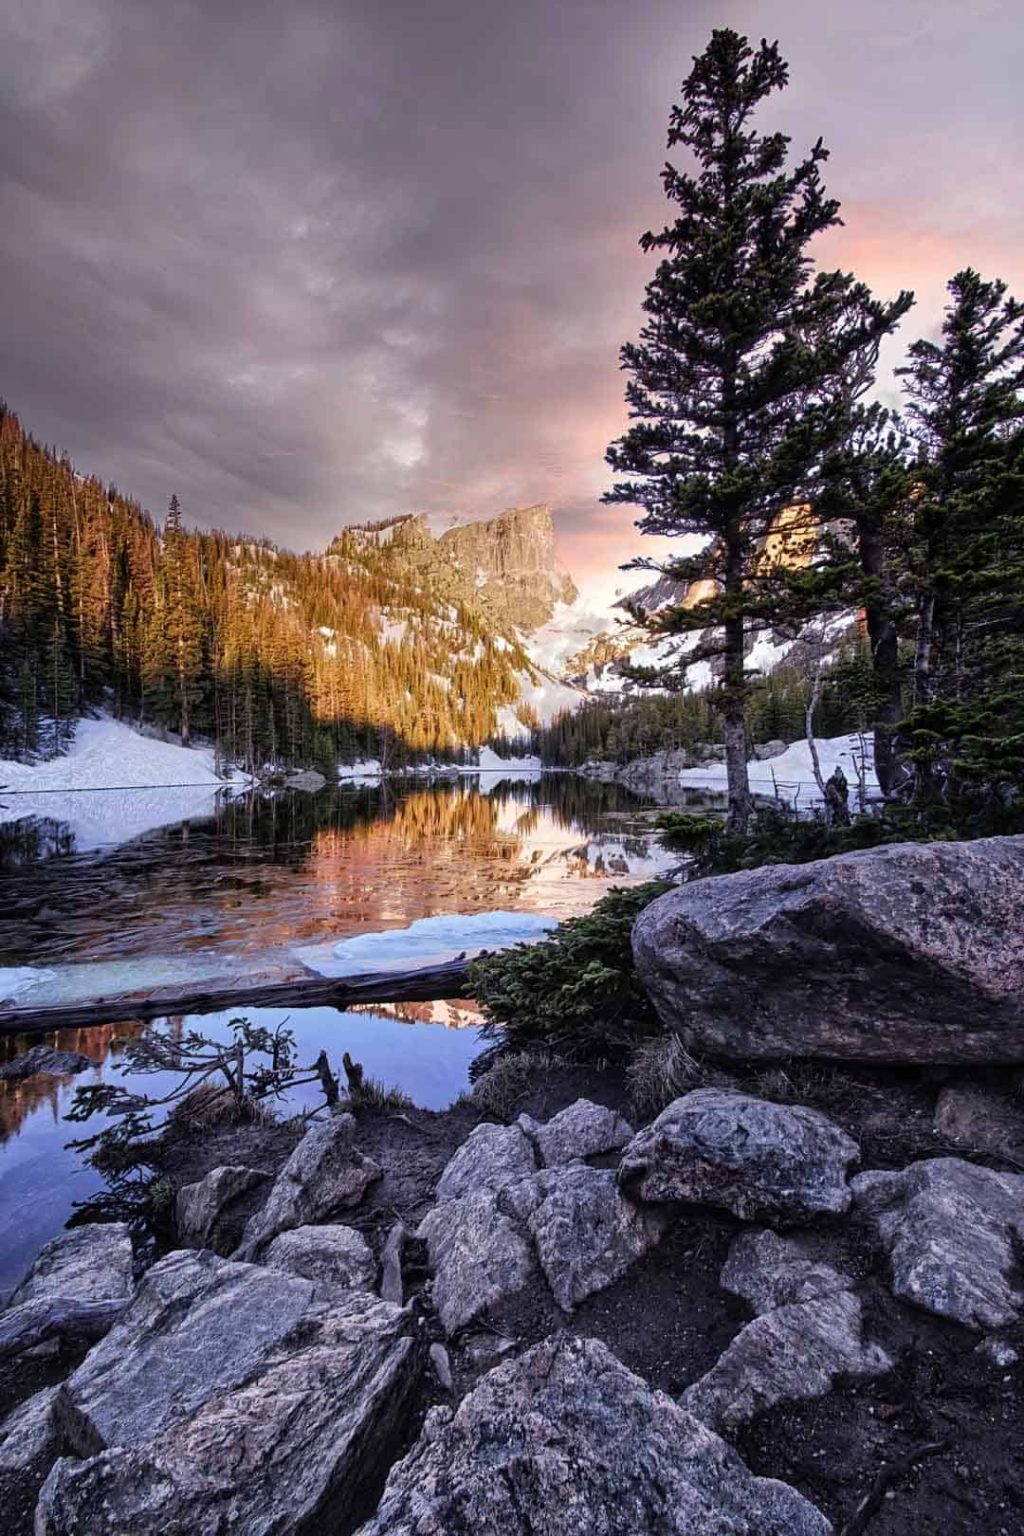 Dramatic dawn light falling over Dream Lake and Hallett Peak in Rocky Mountain National Park, Colorado.